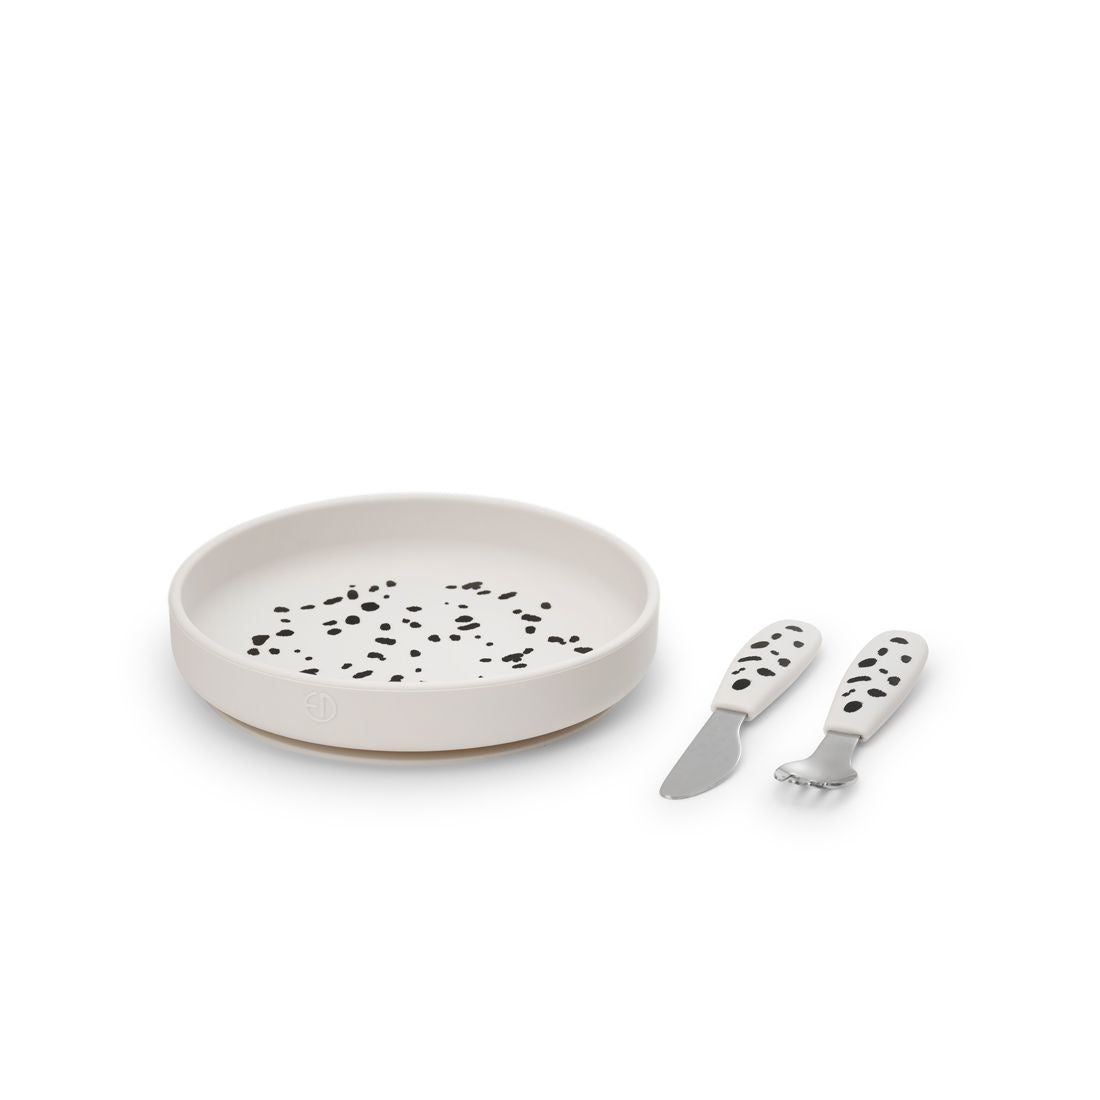 Elodie Details - silicone set - plate and cutlery - Dalmatian Dots